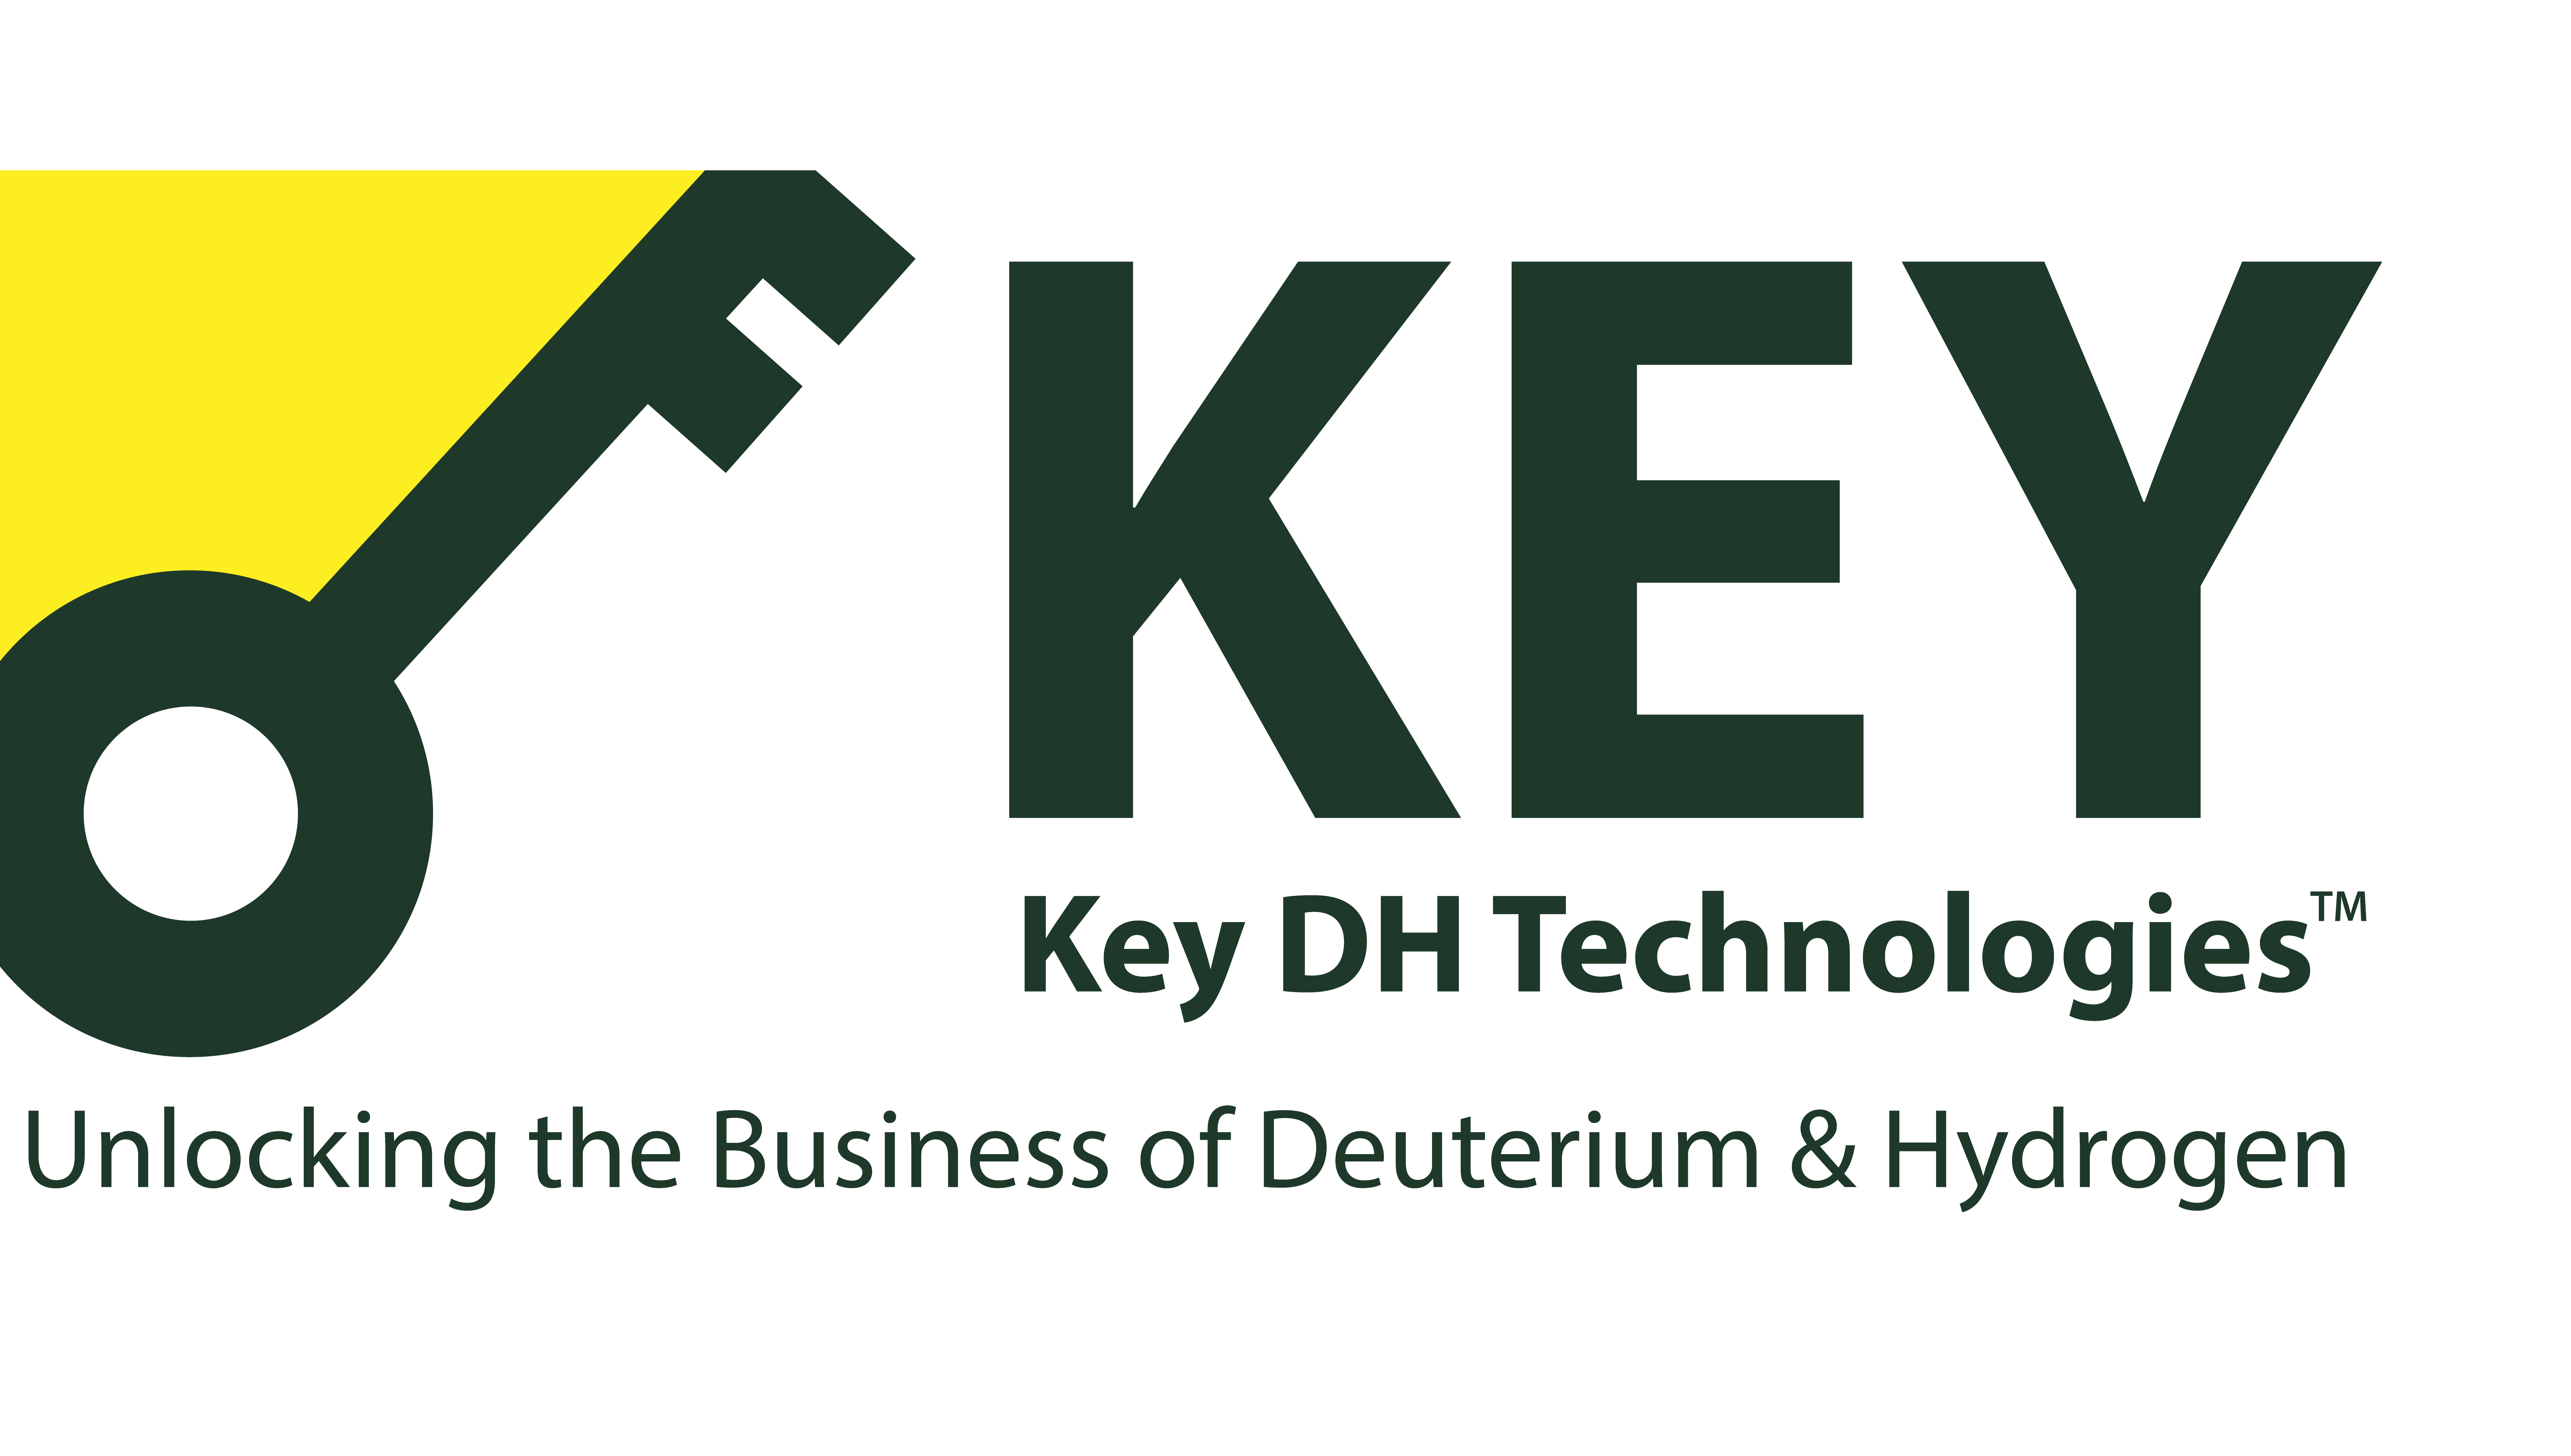 Key DH Technologies Inc., Tuesday, June 8, 2021, Press release picture